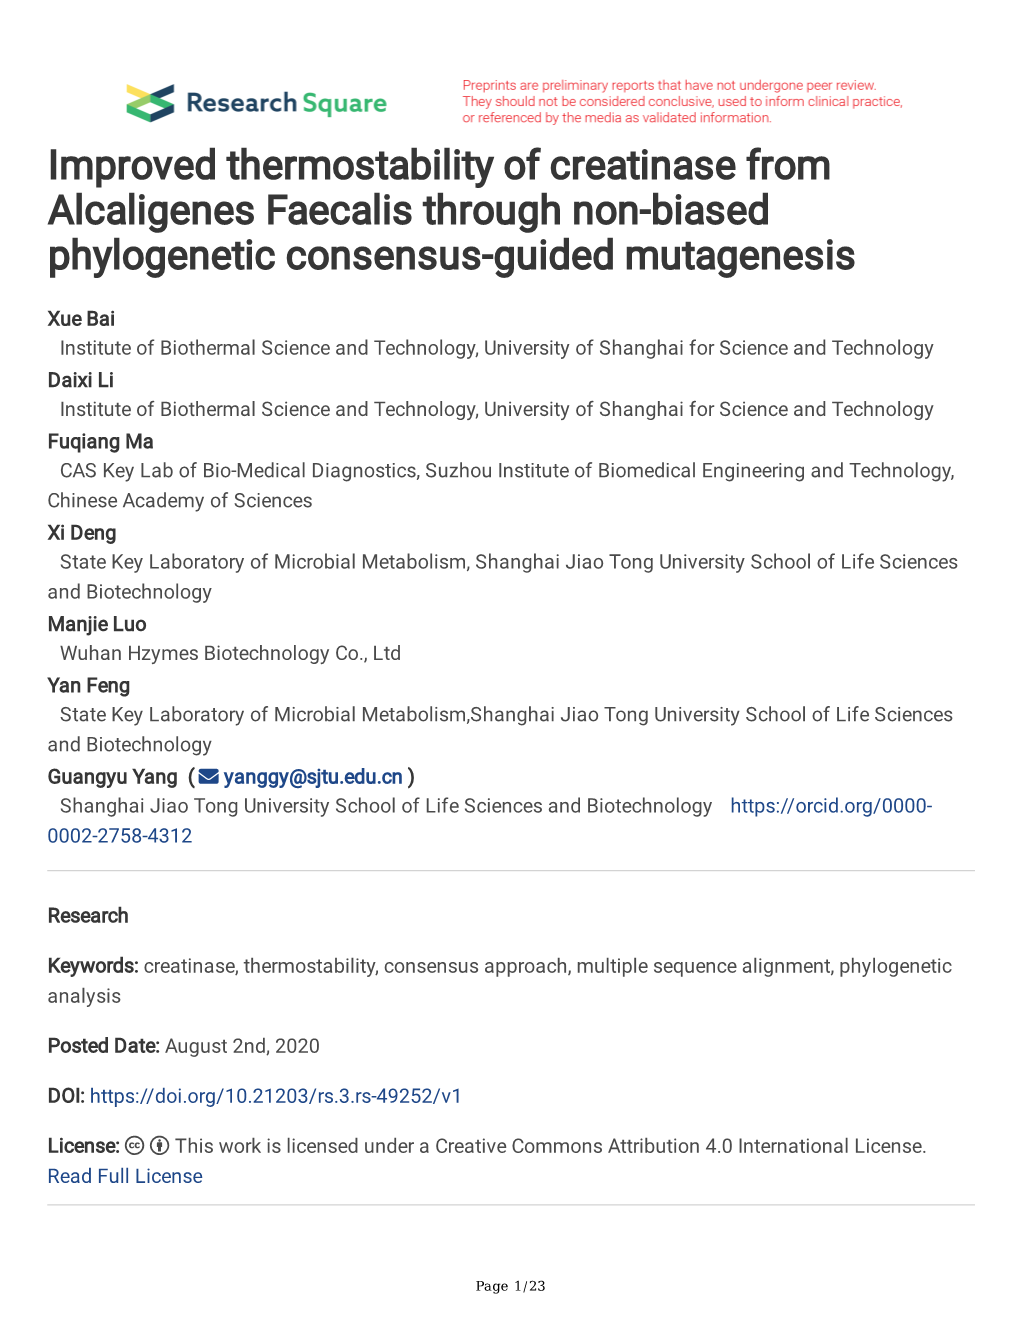 Improved Thermostability of Creatinase from Alcaligenes Faecalis Through Non-Biased Phylogenetic Consensus-Guided Mutagenesis